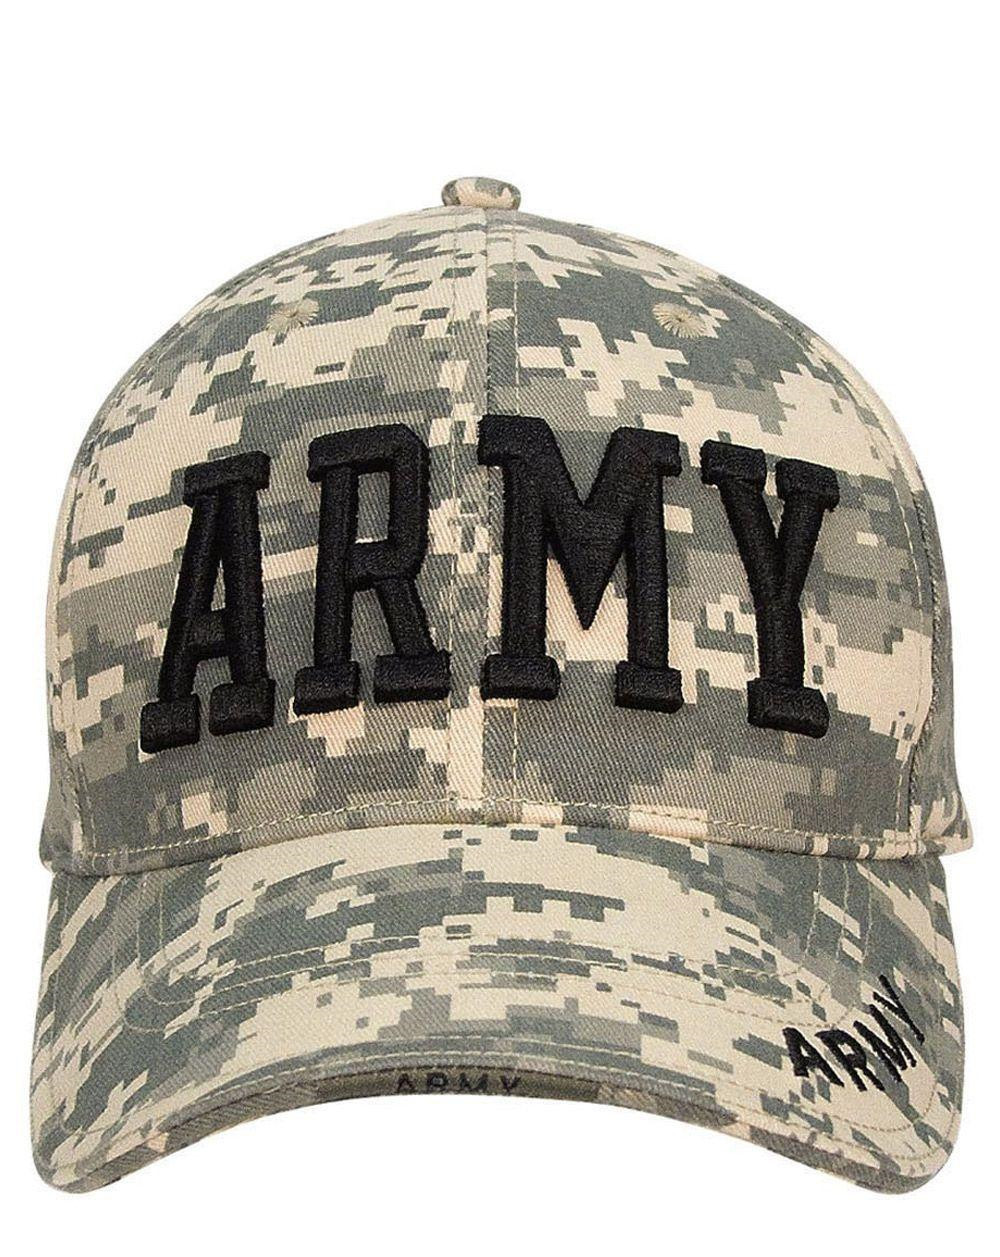 Rothco Deluxe Low Profile Baseballcap (ACU Camo, One Size)